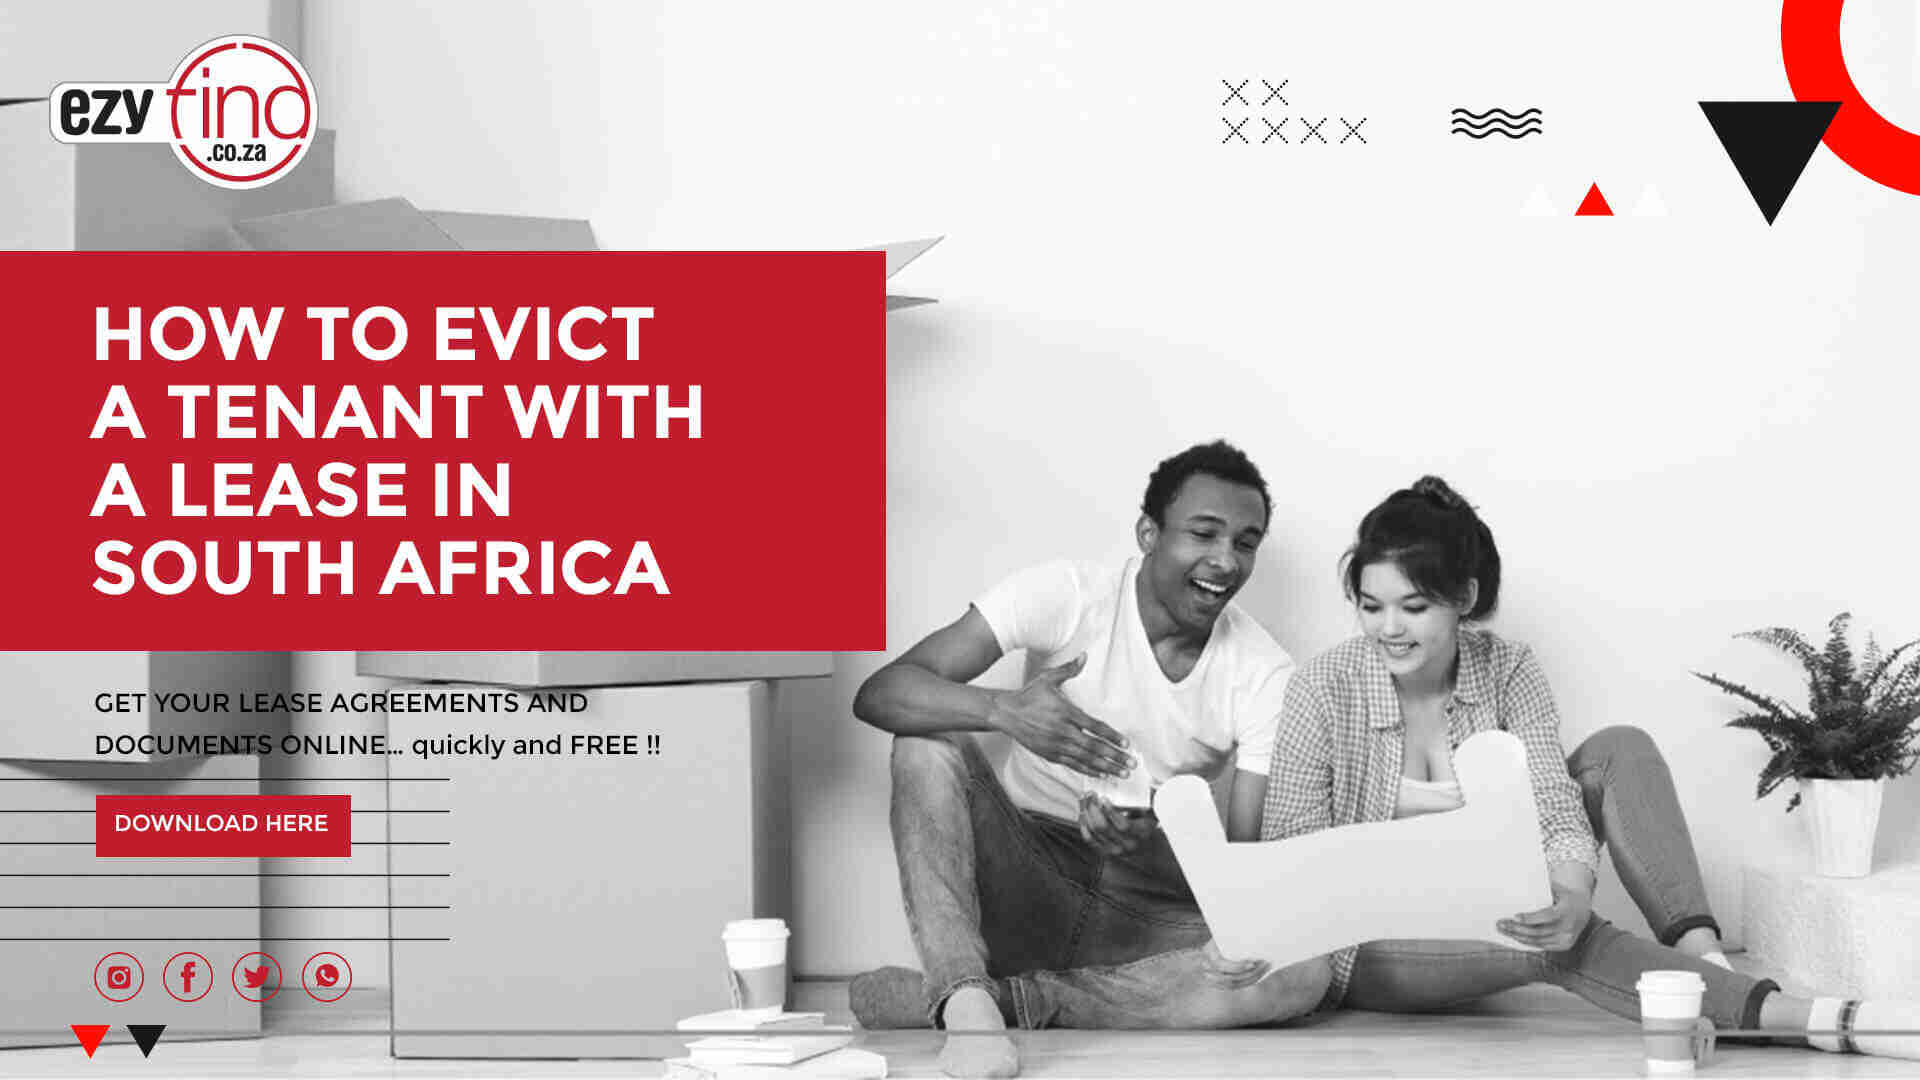 How to evict a tenant with a lease in south africa